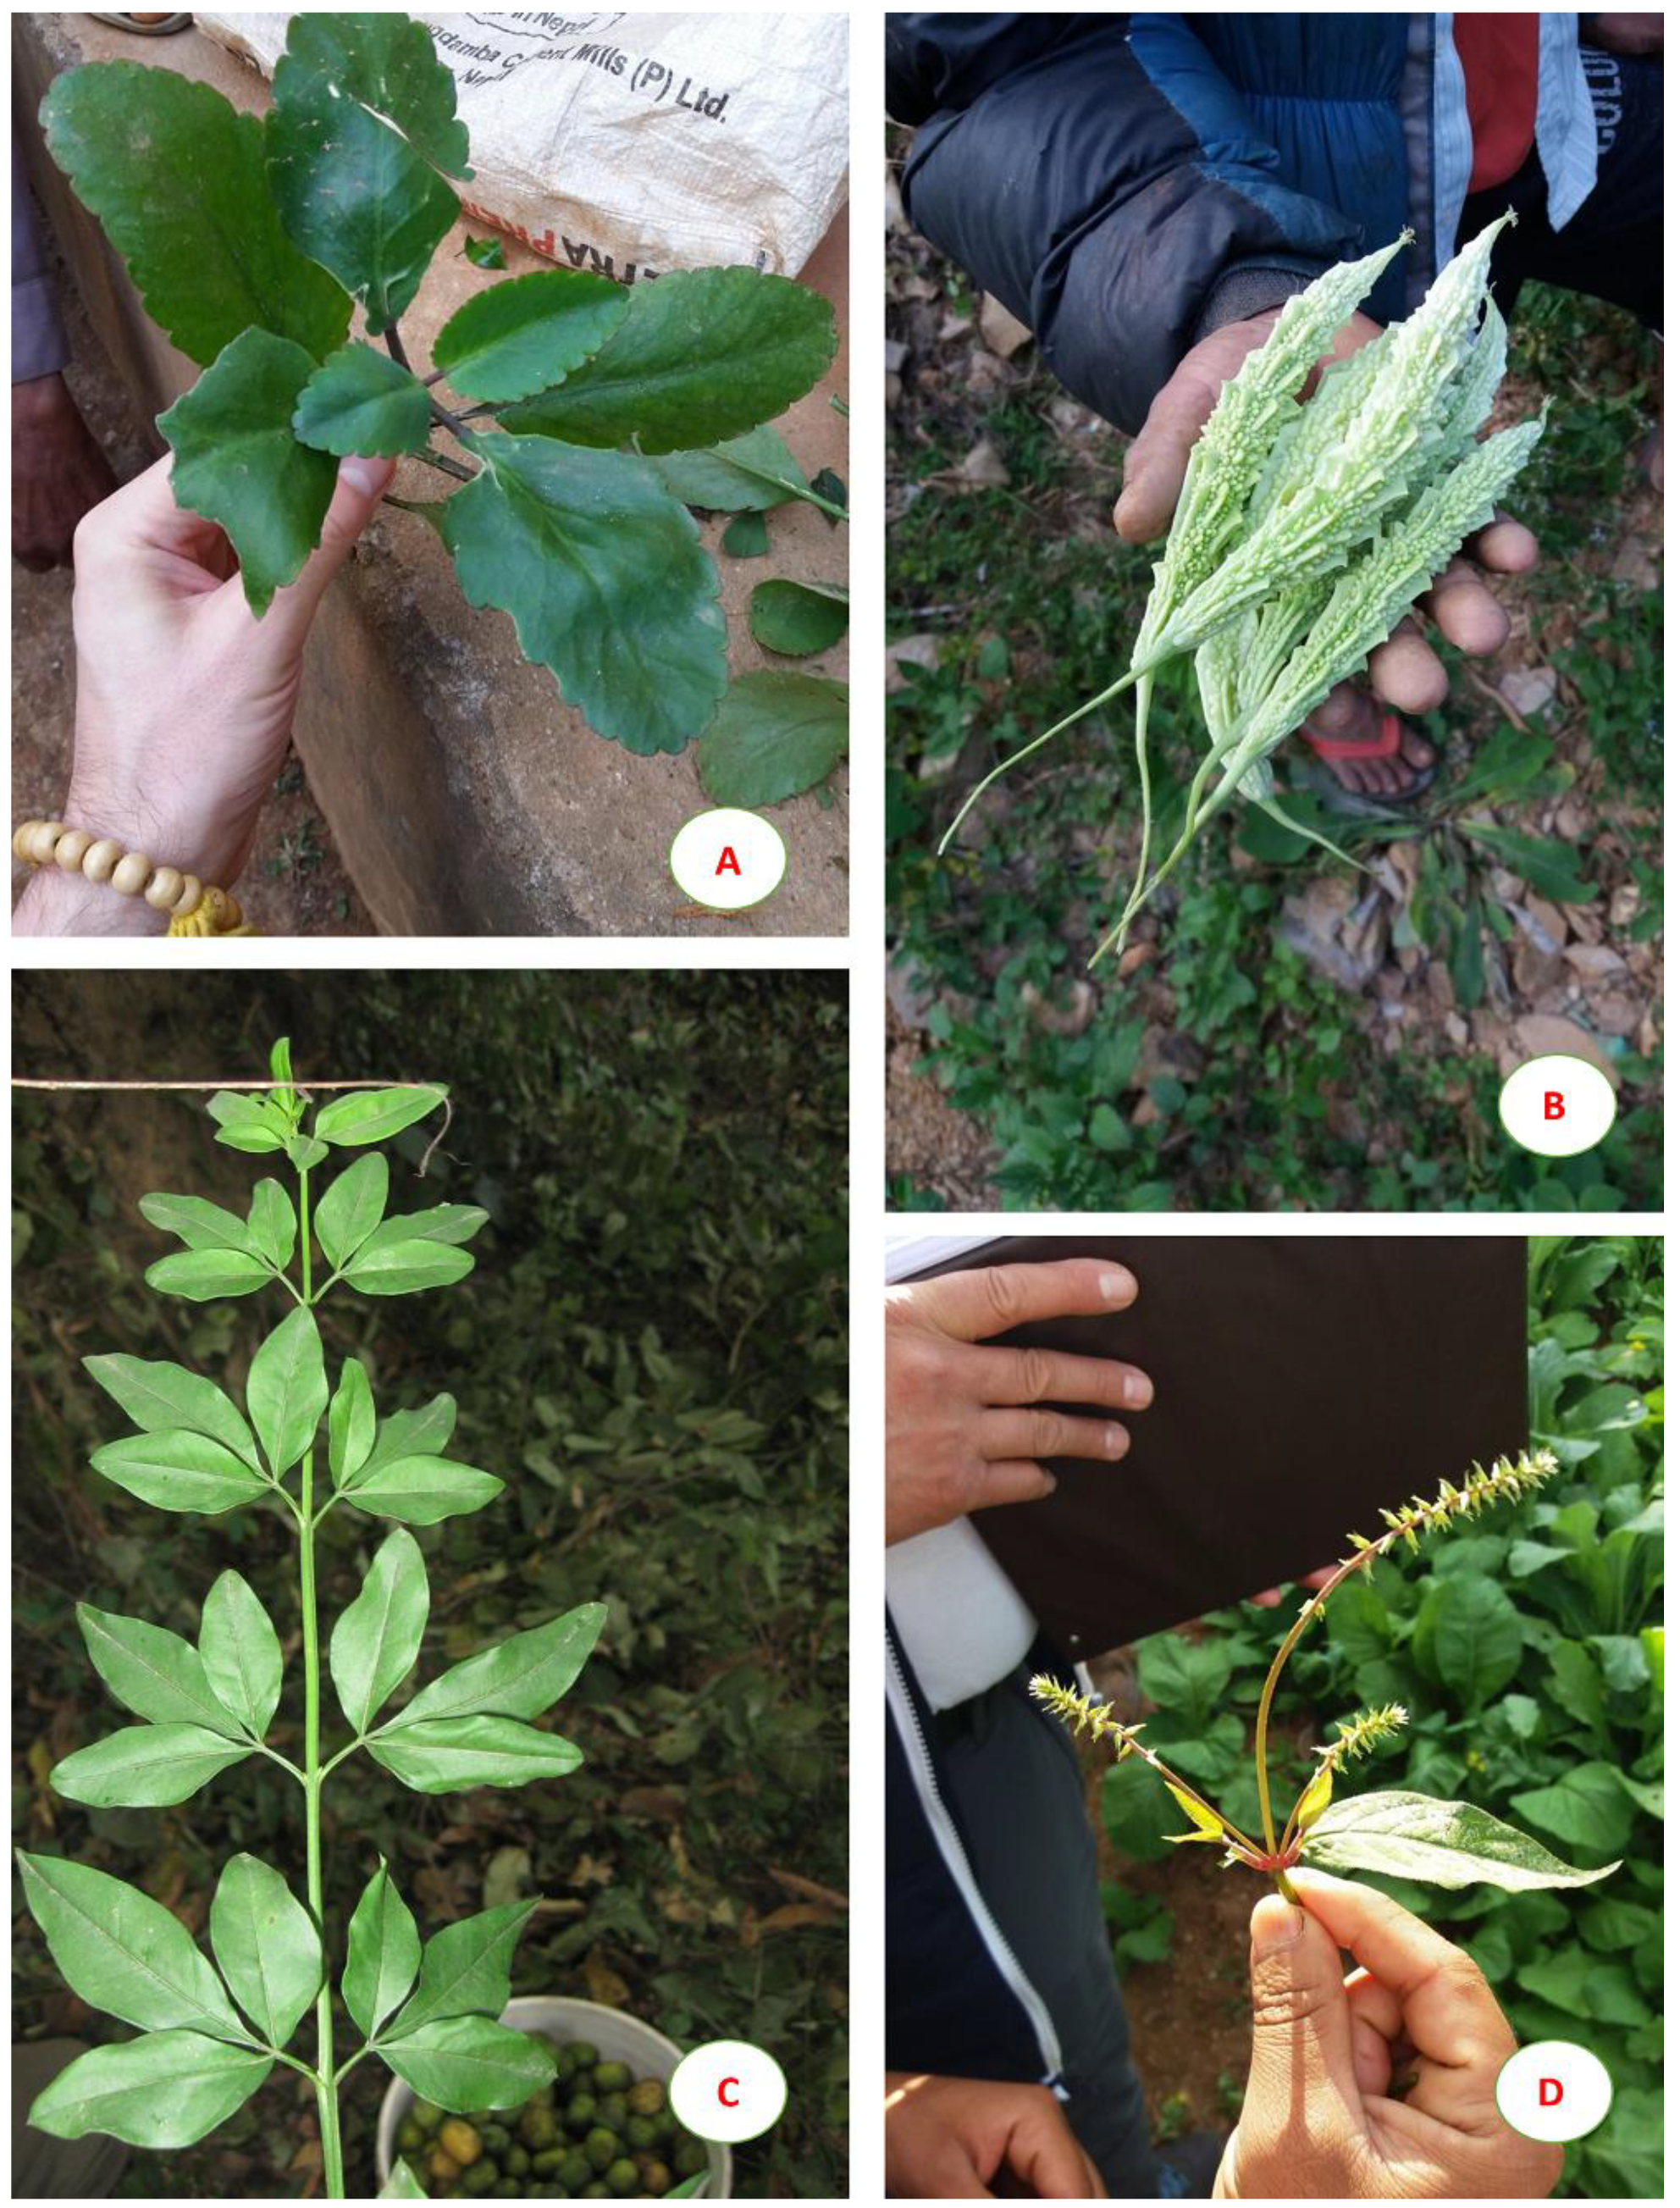 Plants Free Full-Text Traditional Uses of Medicinal Plants by Ethnic People in the Kavrepalanchok District, Central Nepal image